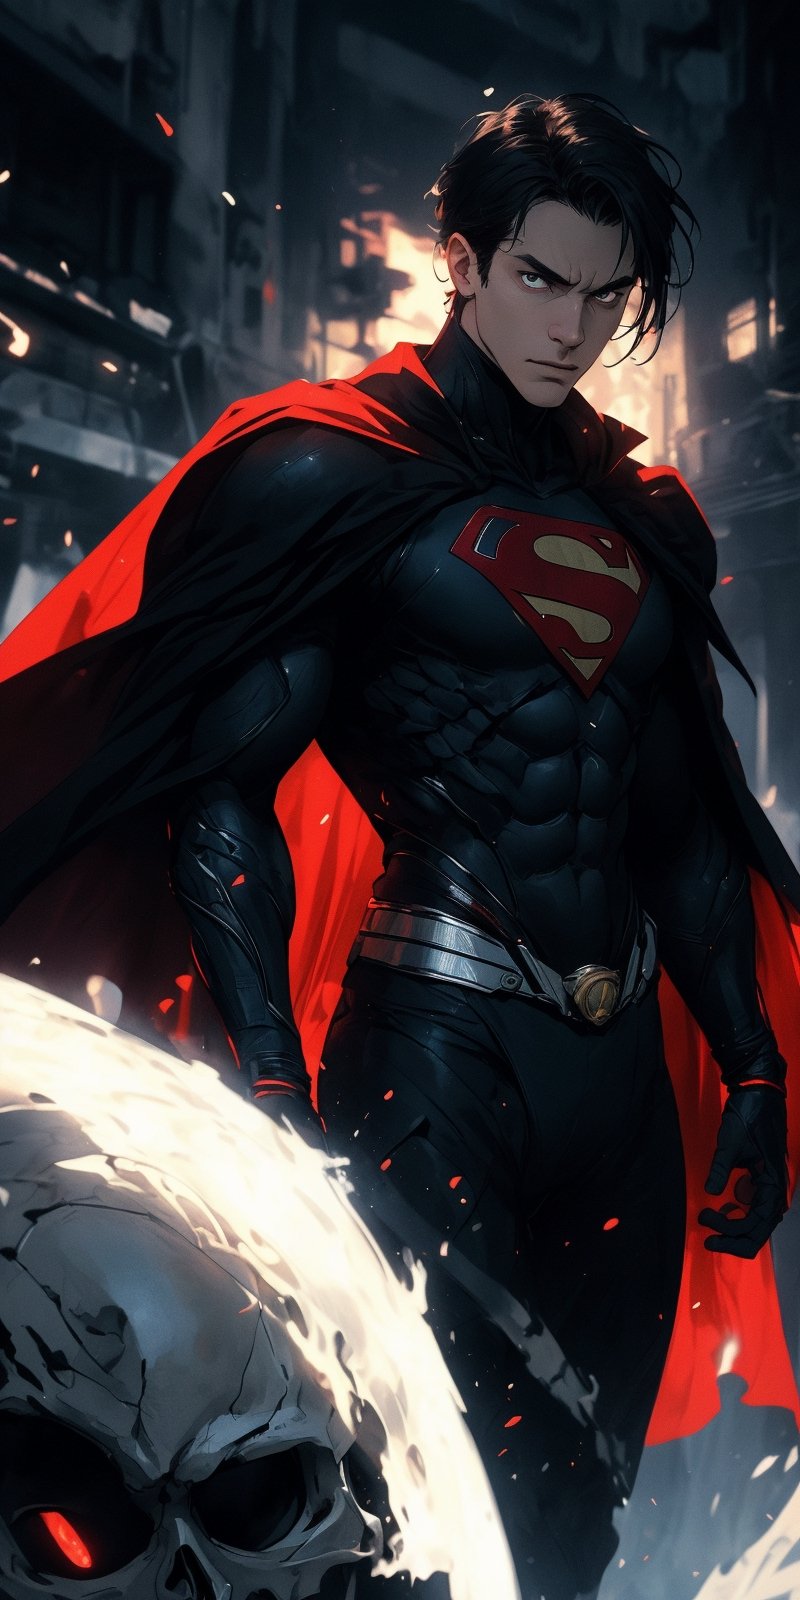 Superman standing surrounded by skulls and death, (black cape), red eyes, glowing eyes, long hair, black hair, pale_skin:1.3, masterpiece, ultra detailed image, a perfect image unfolds with 8k resolution, professional, HDR, high resolution, best illumination, extremely detailed, ray tracing, realistic lighting effects, dark colors, sad colors, neon noir illustration, solo_focus